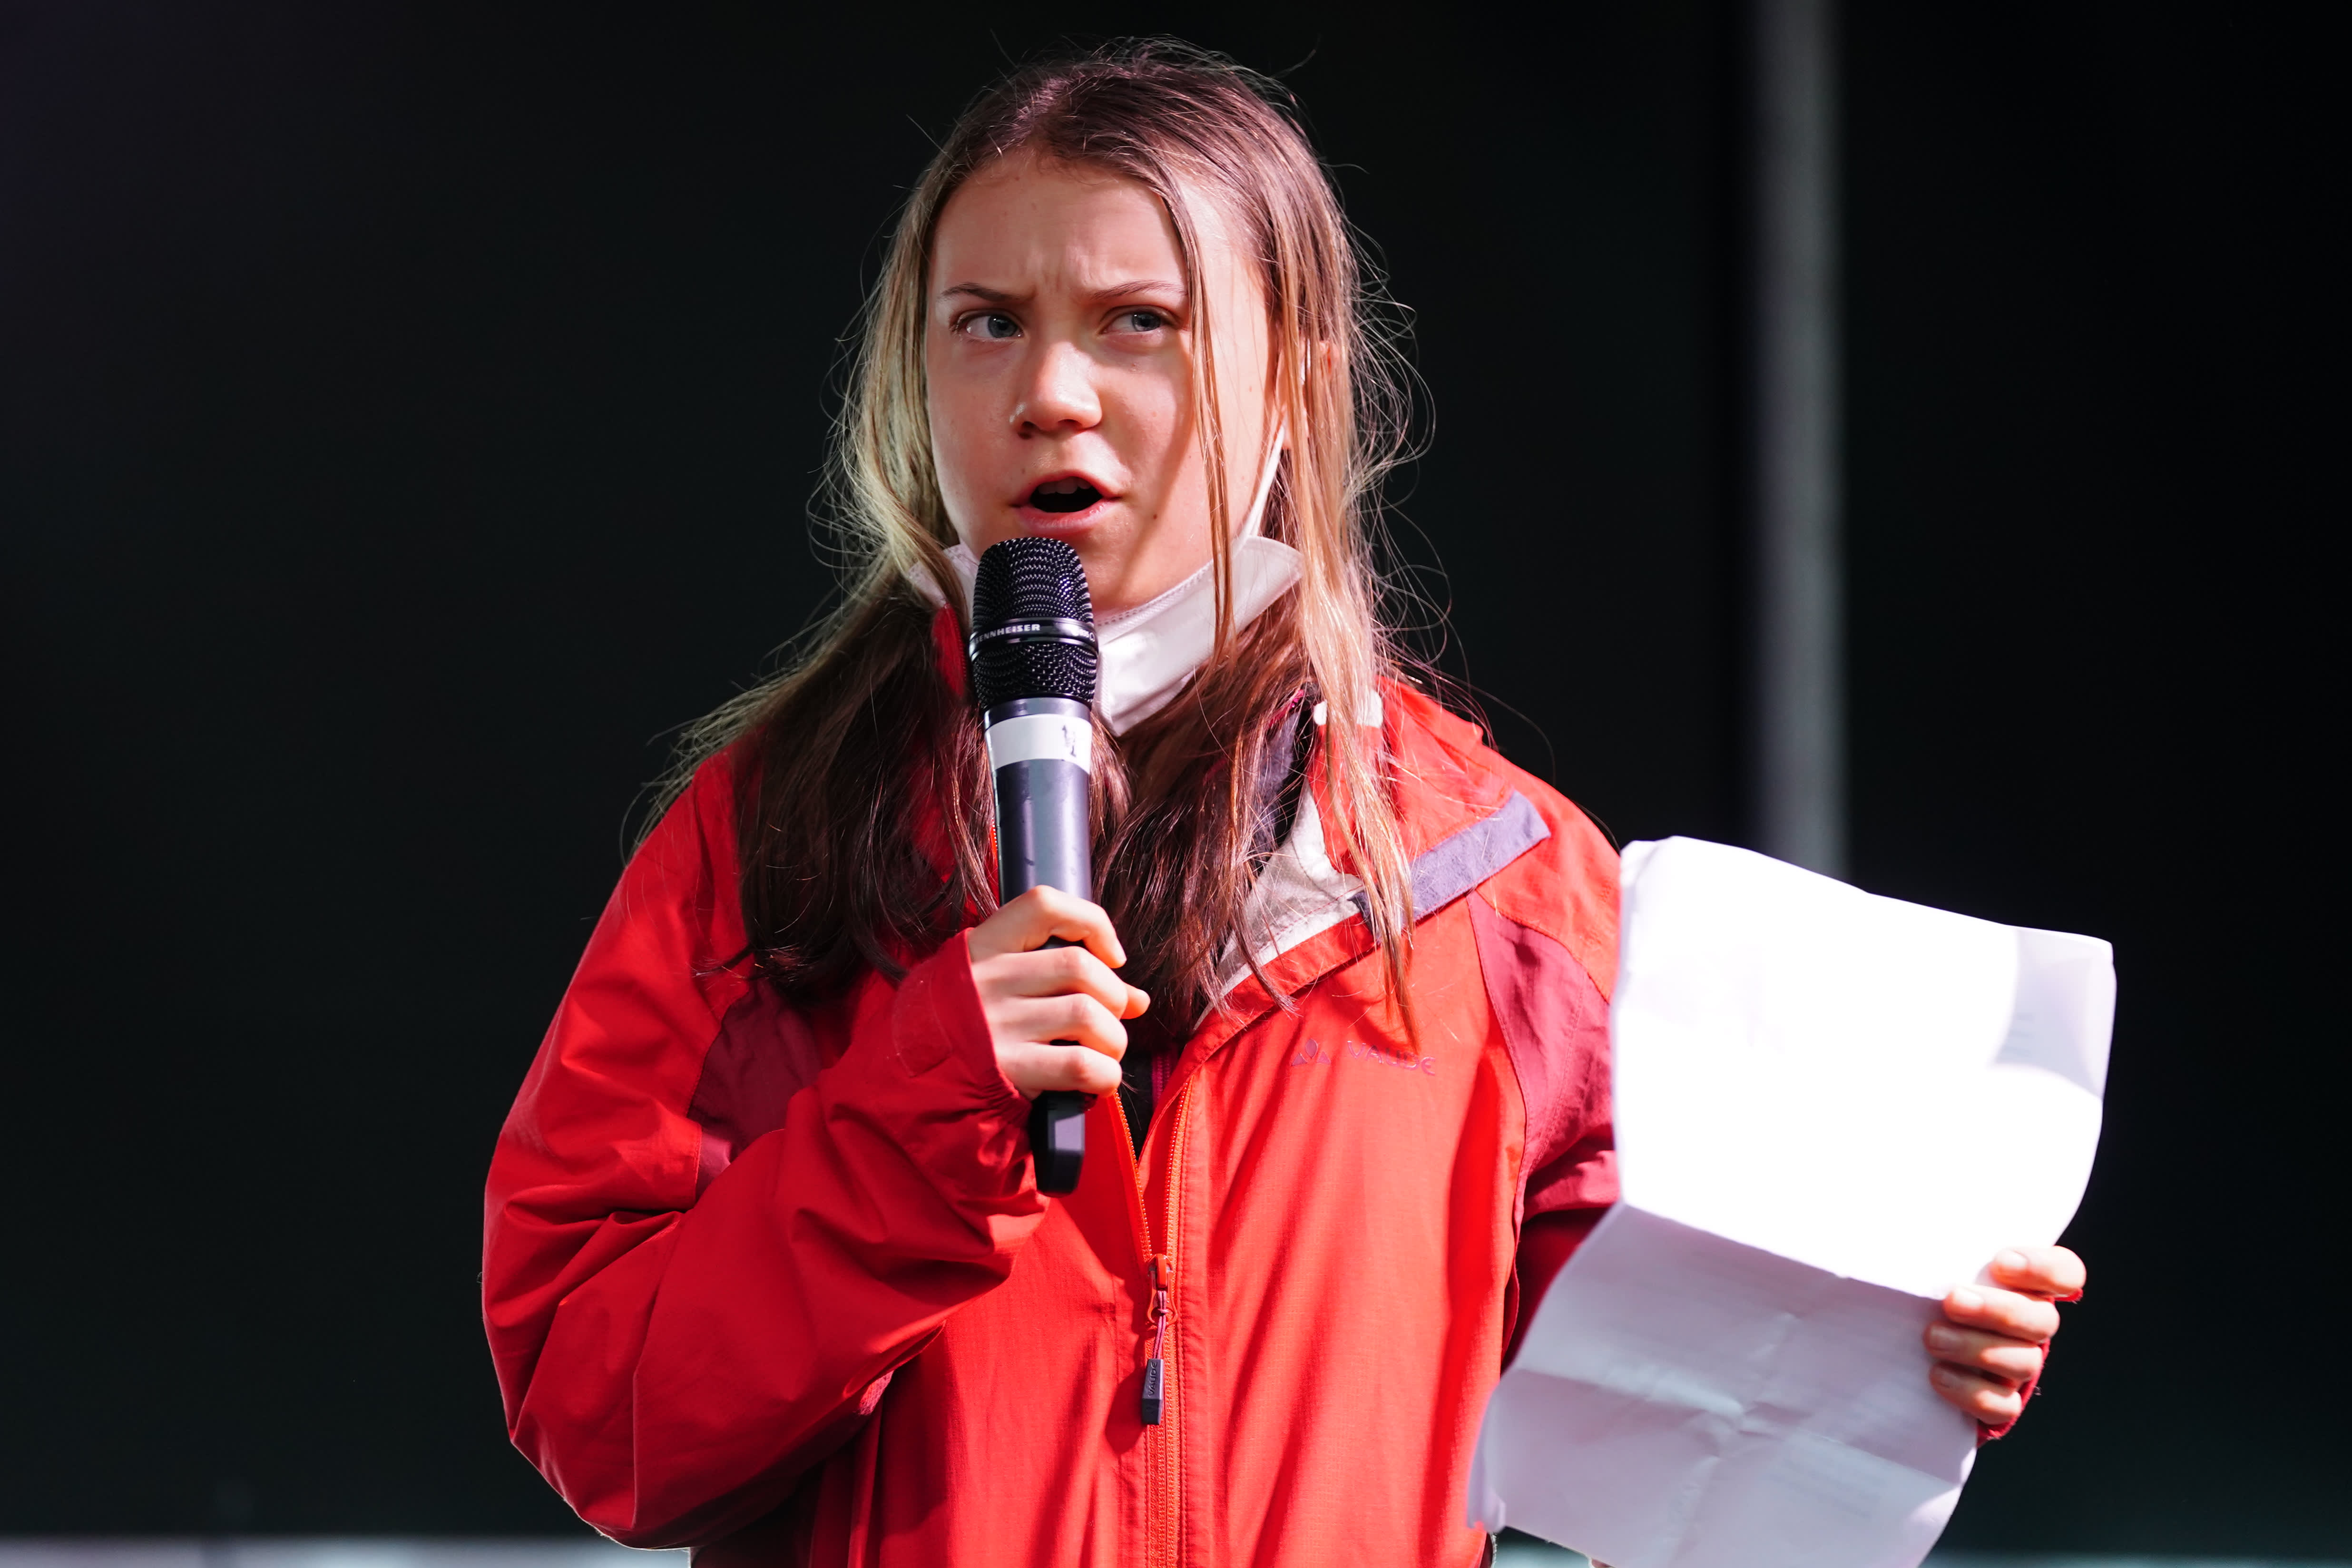 ‘COP26 is a failure’: Greta Thunberg says climate summit has turned into a PR event – CNBC